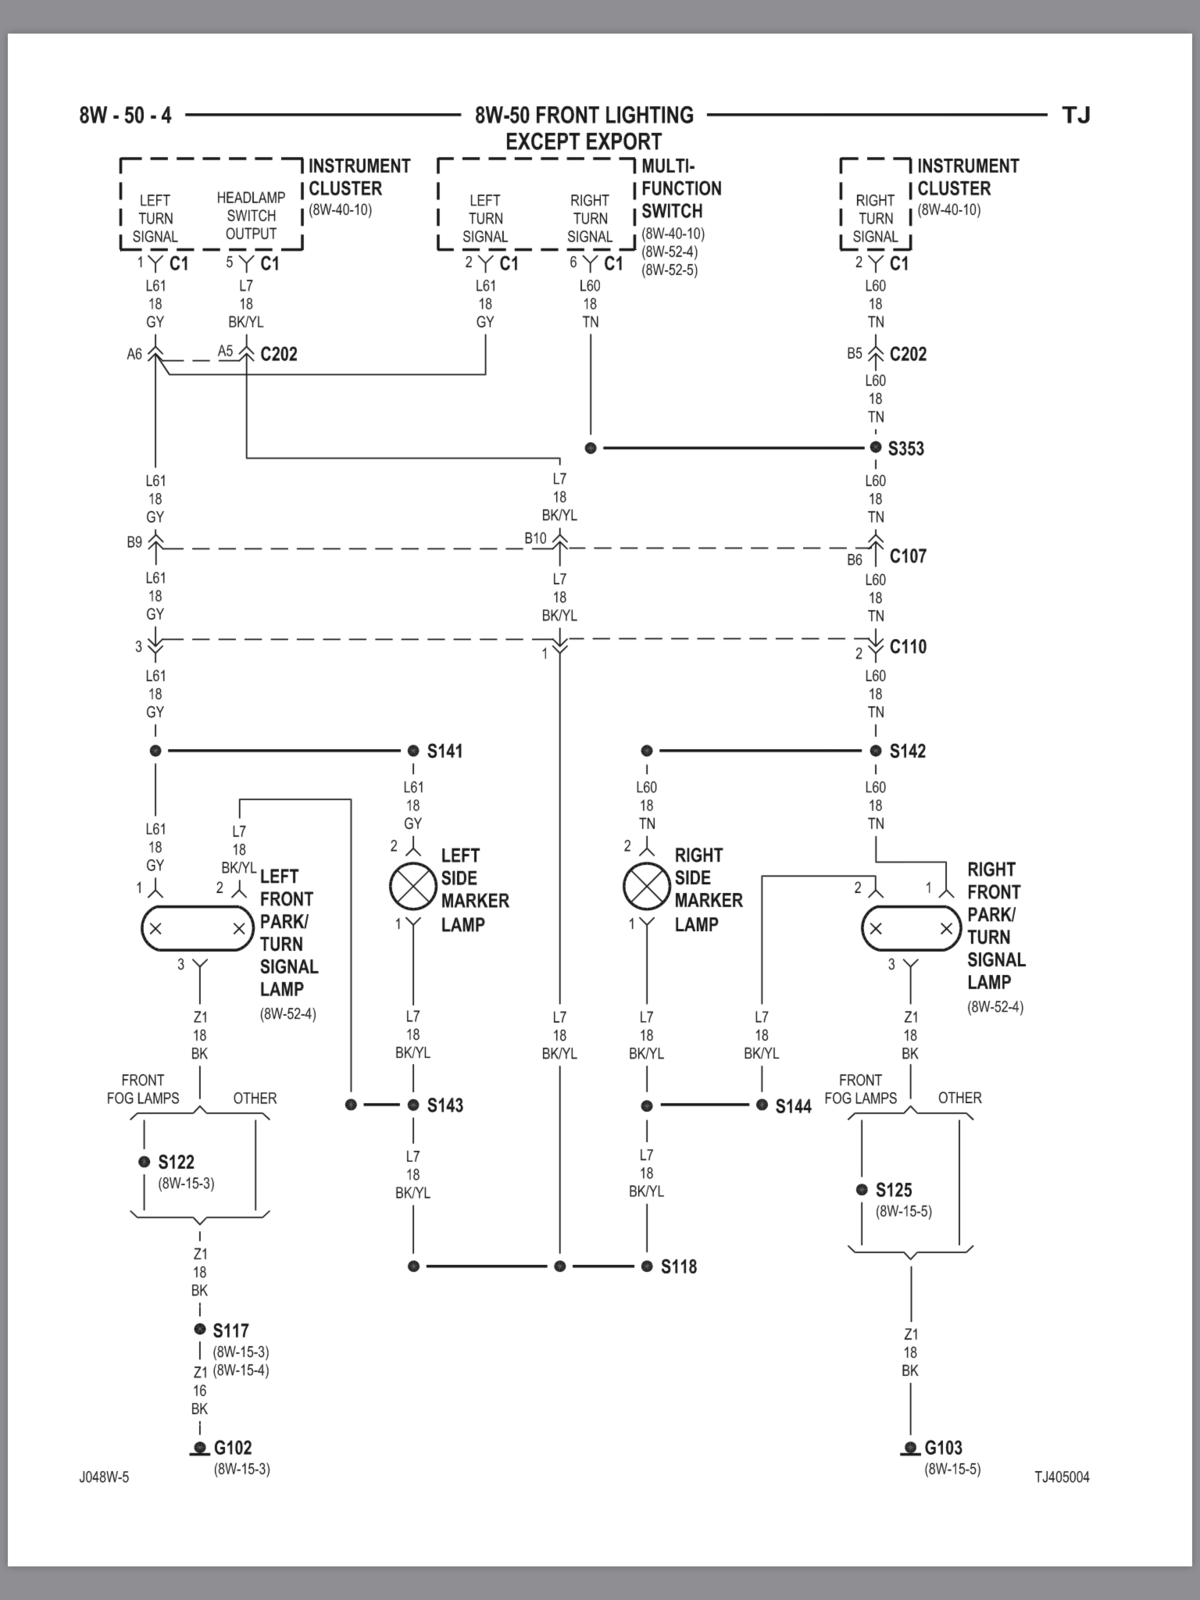 Wiring Guide or Diagram | Jeep Wrangler TJ Forum 99 Jeep Wrangler Wiring Diagram Jeep Wrangler TJ Forum